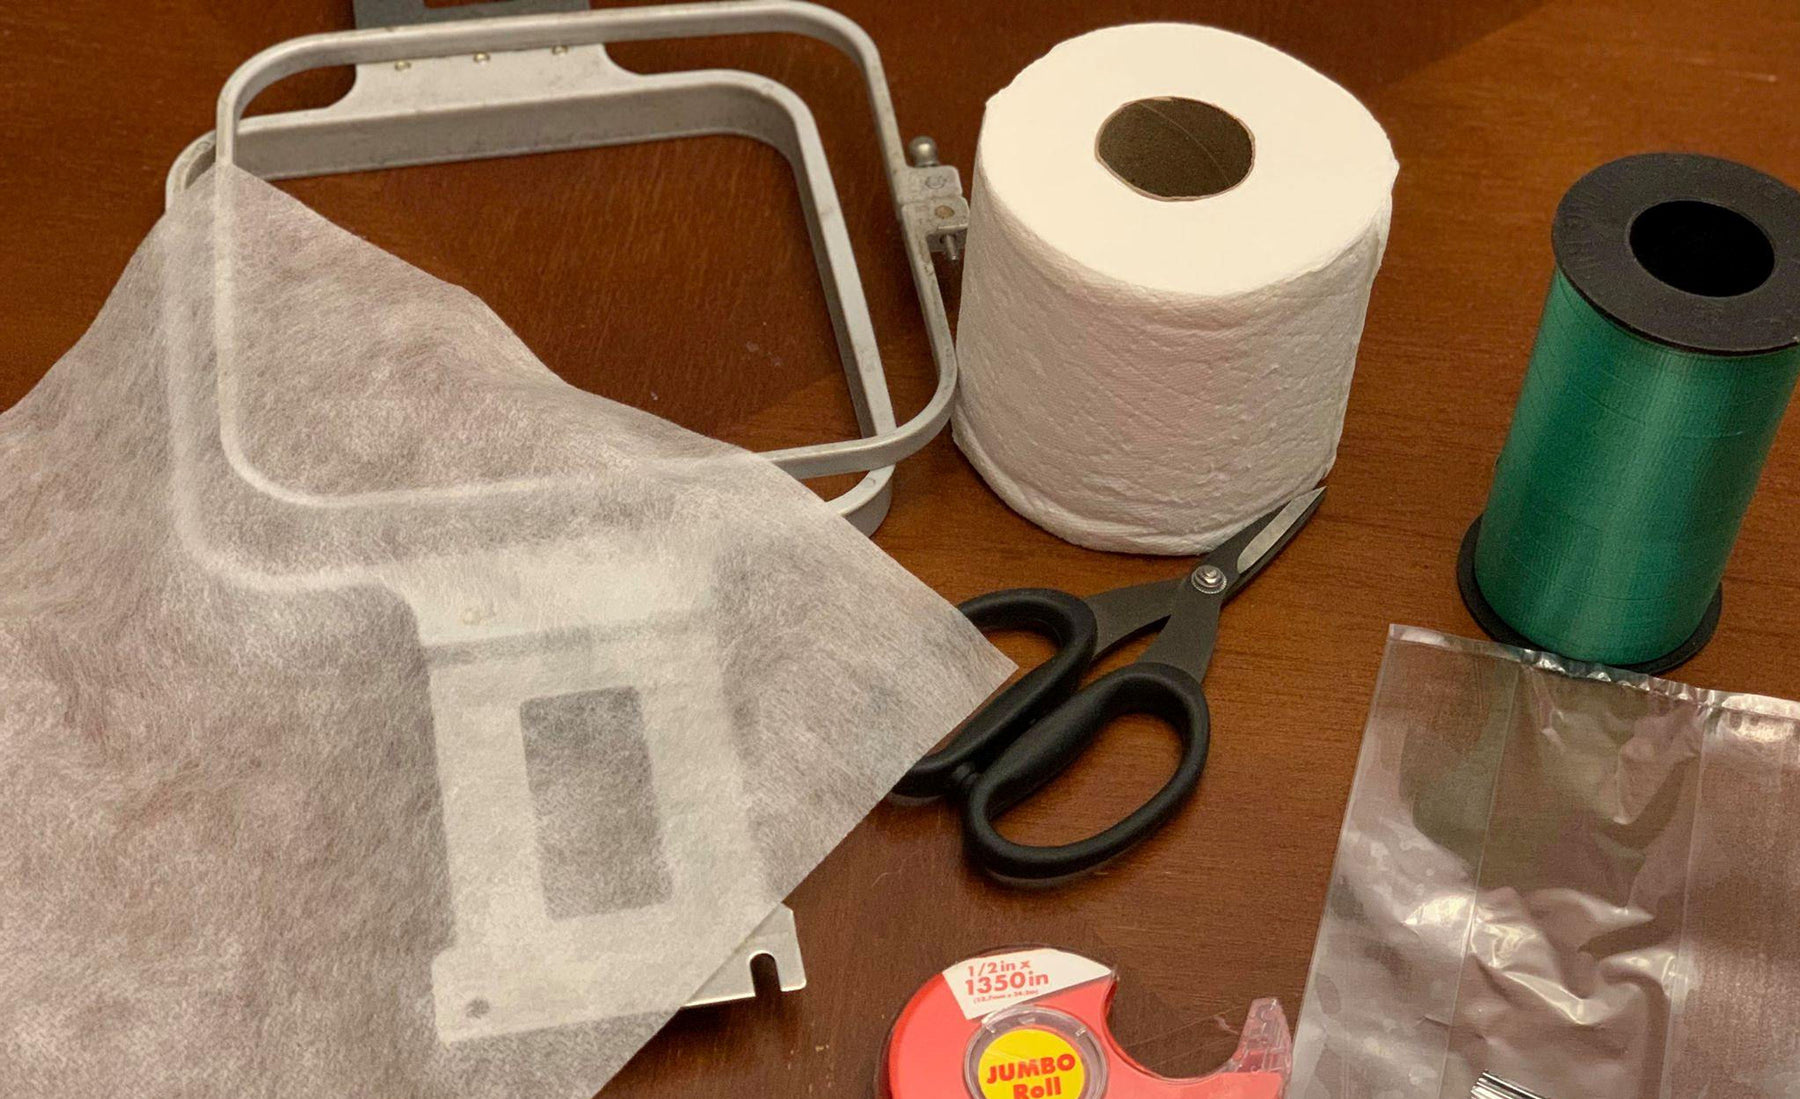 How To Easily Embroider on Toilet Paper